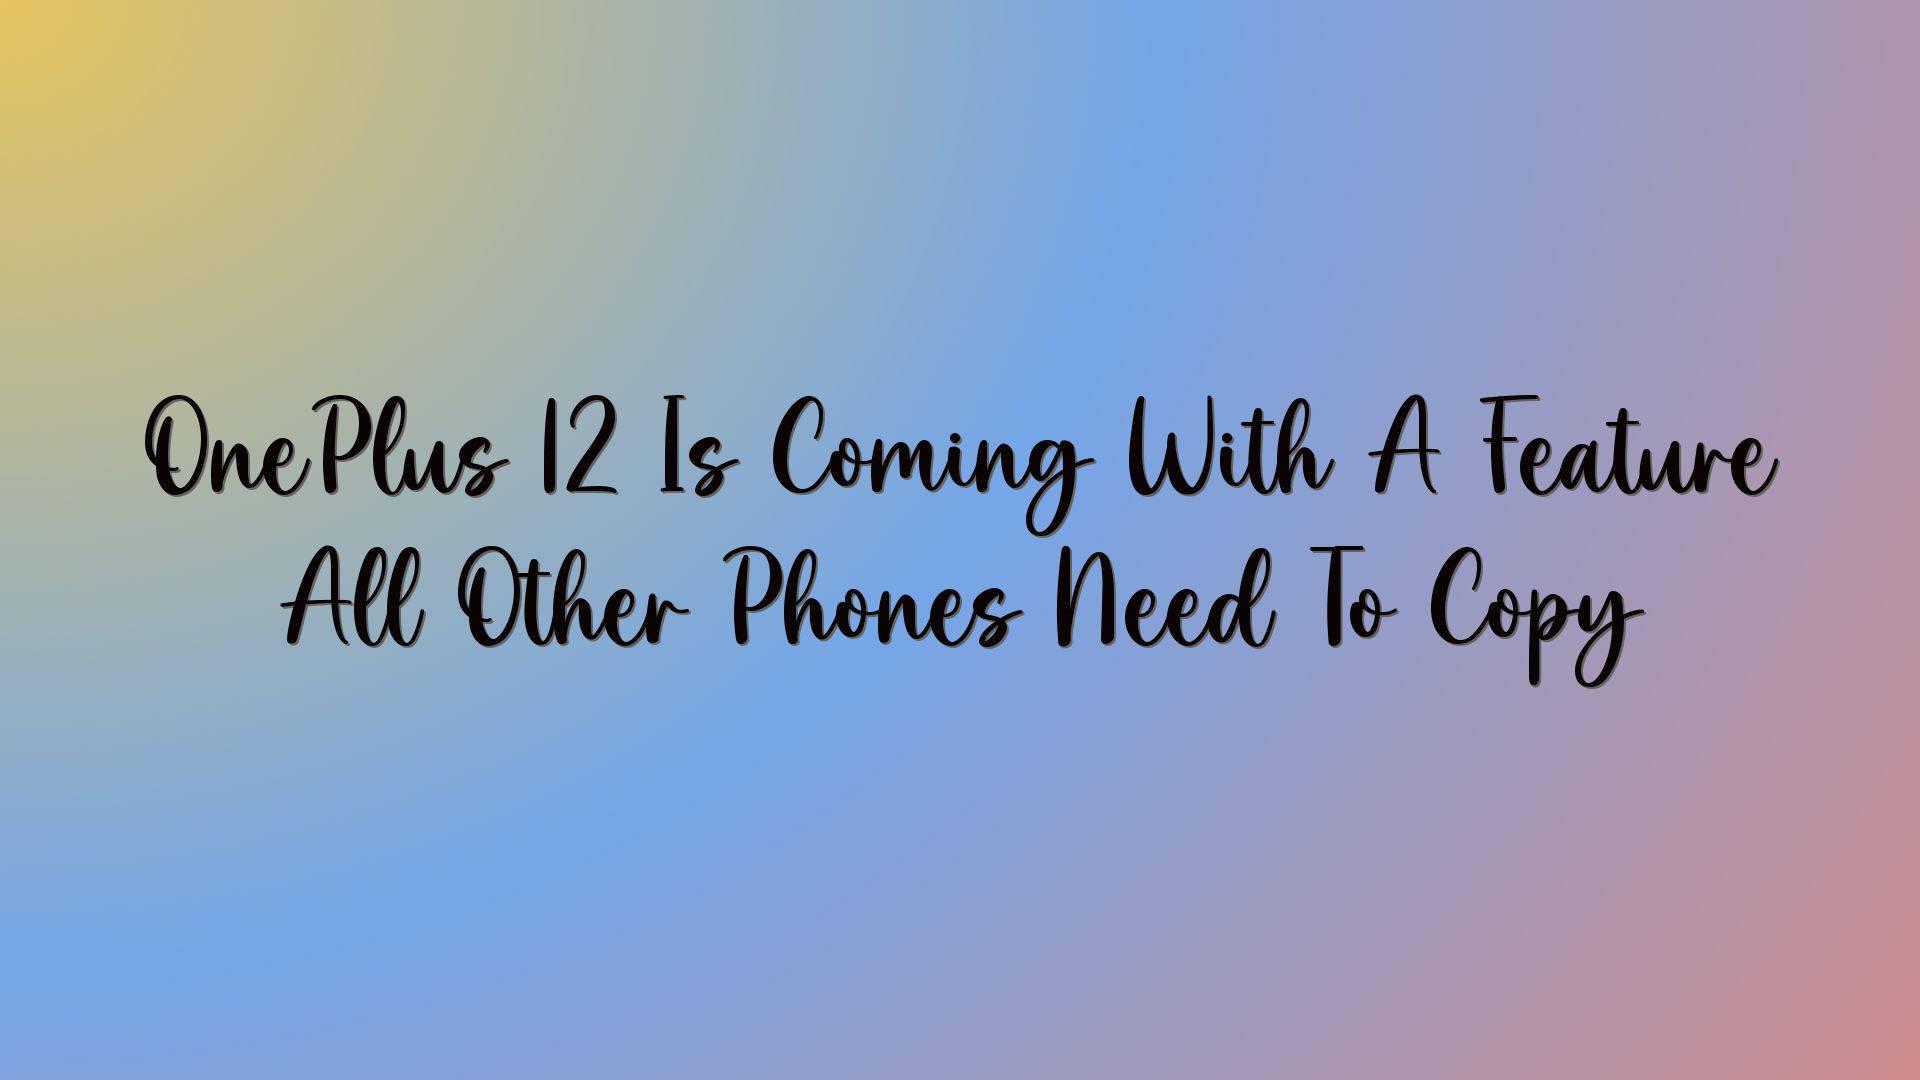 OnePlus 12 Is Coming With A Feature All Other Phones Need To Copy